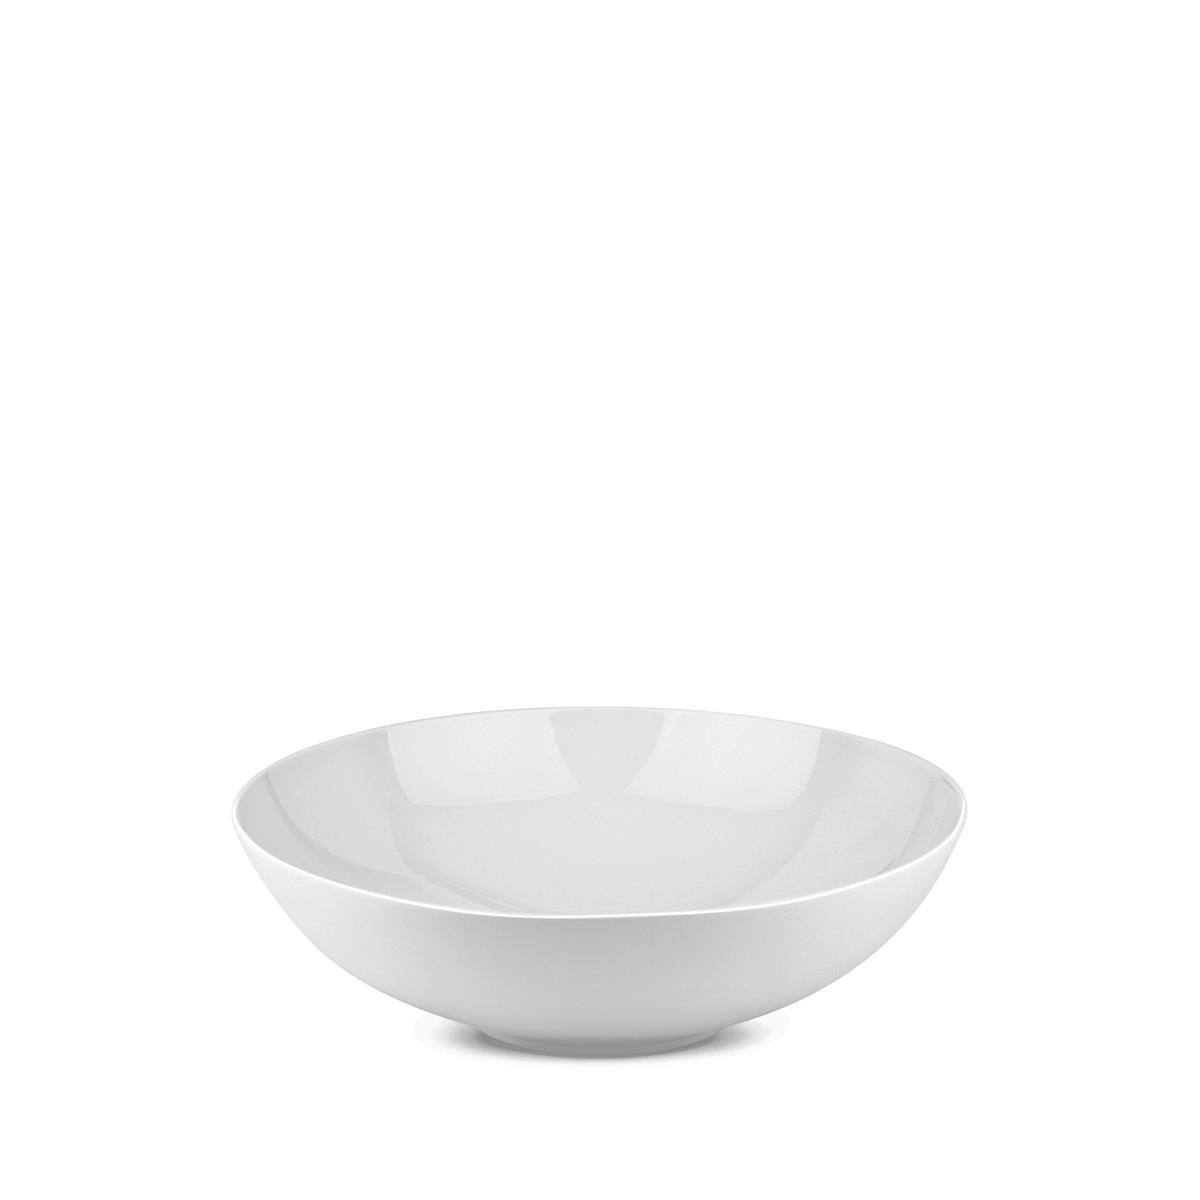 Alessi-Cha Sugar bowl in 18/10 stainless steel mirror polished